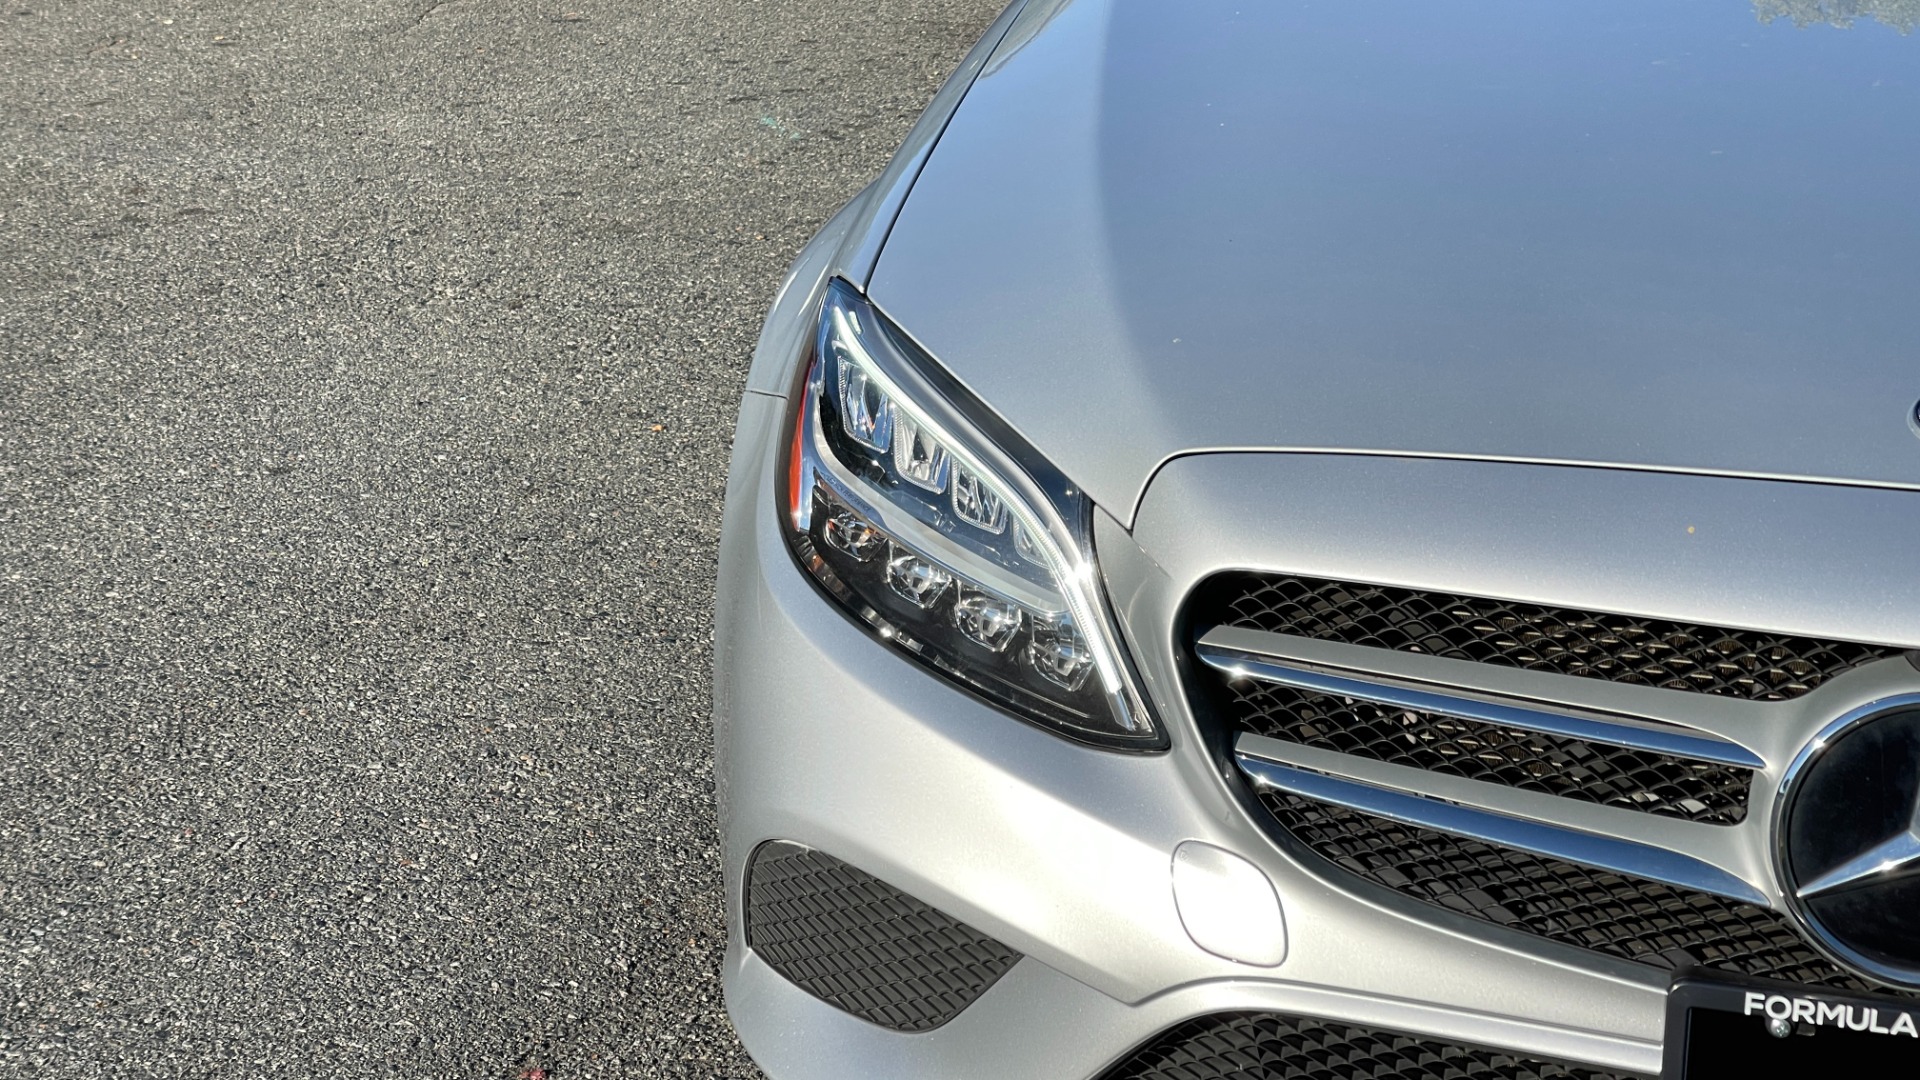 Used 2020 Mercedes-Benz C-Class C300 / BACKUP CAMERA / HEATED SEATS / WOOD GRAIN TRIM for sale $36,395 at Formula Imports in Charlotte NC 28227 34